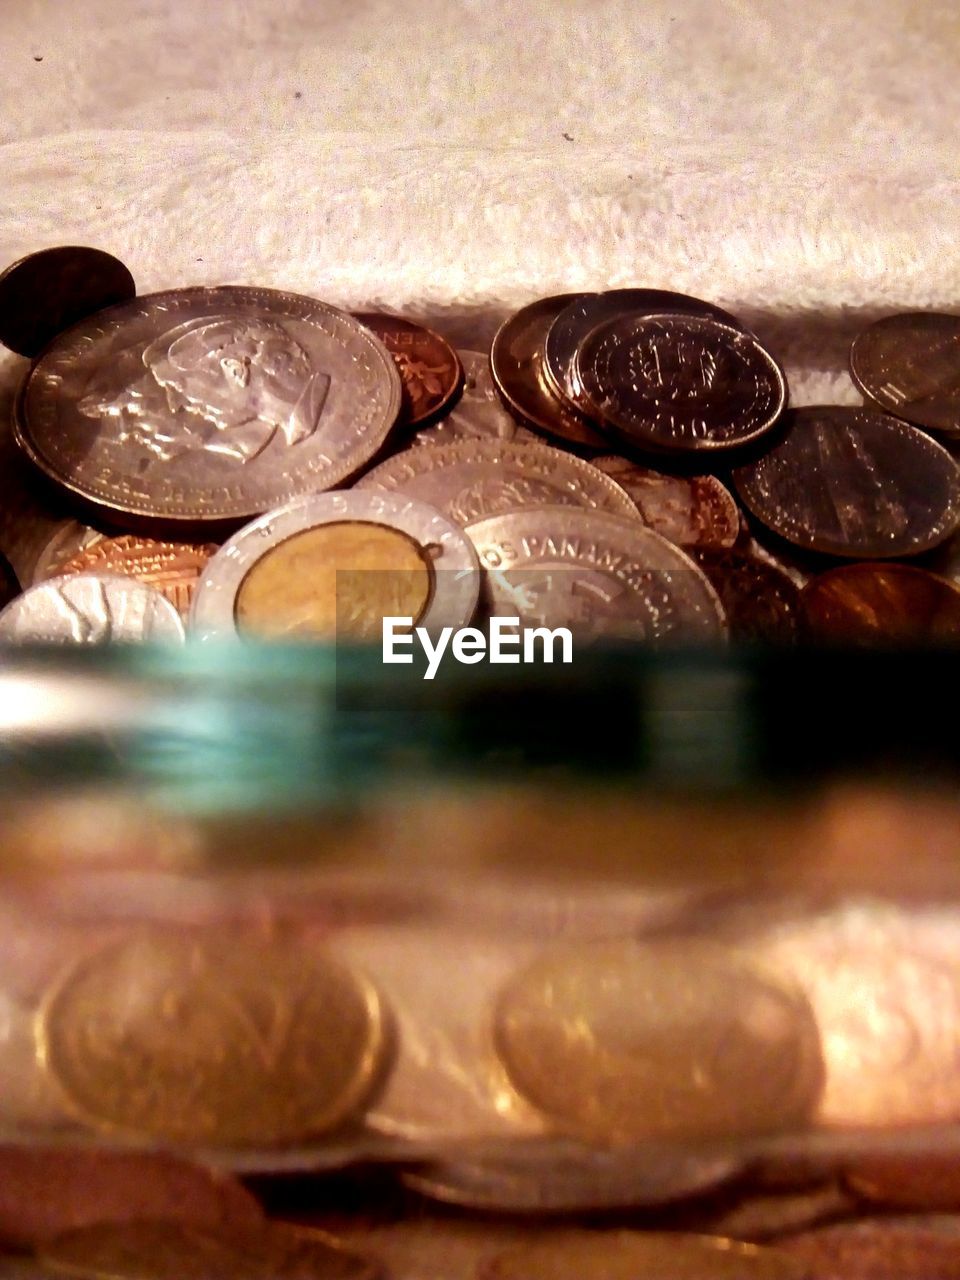 CLOSE-UP OF COINS IN CONTAINER